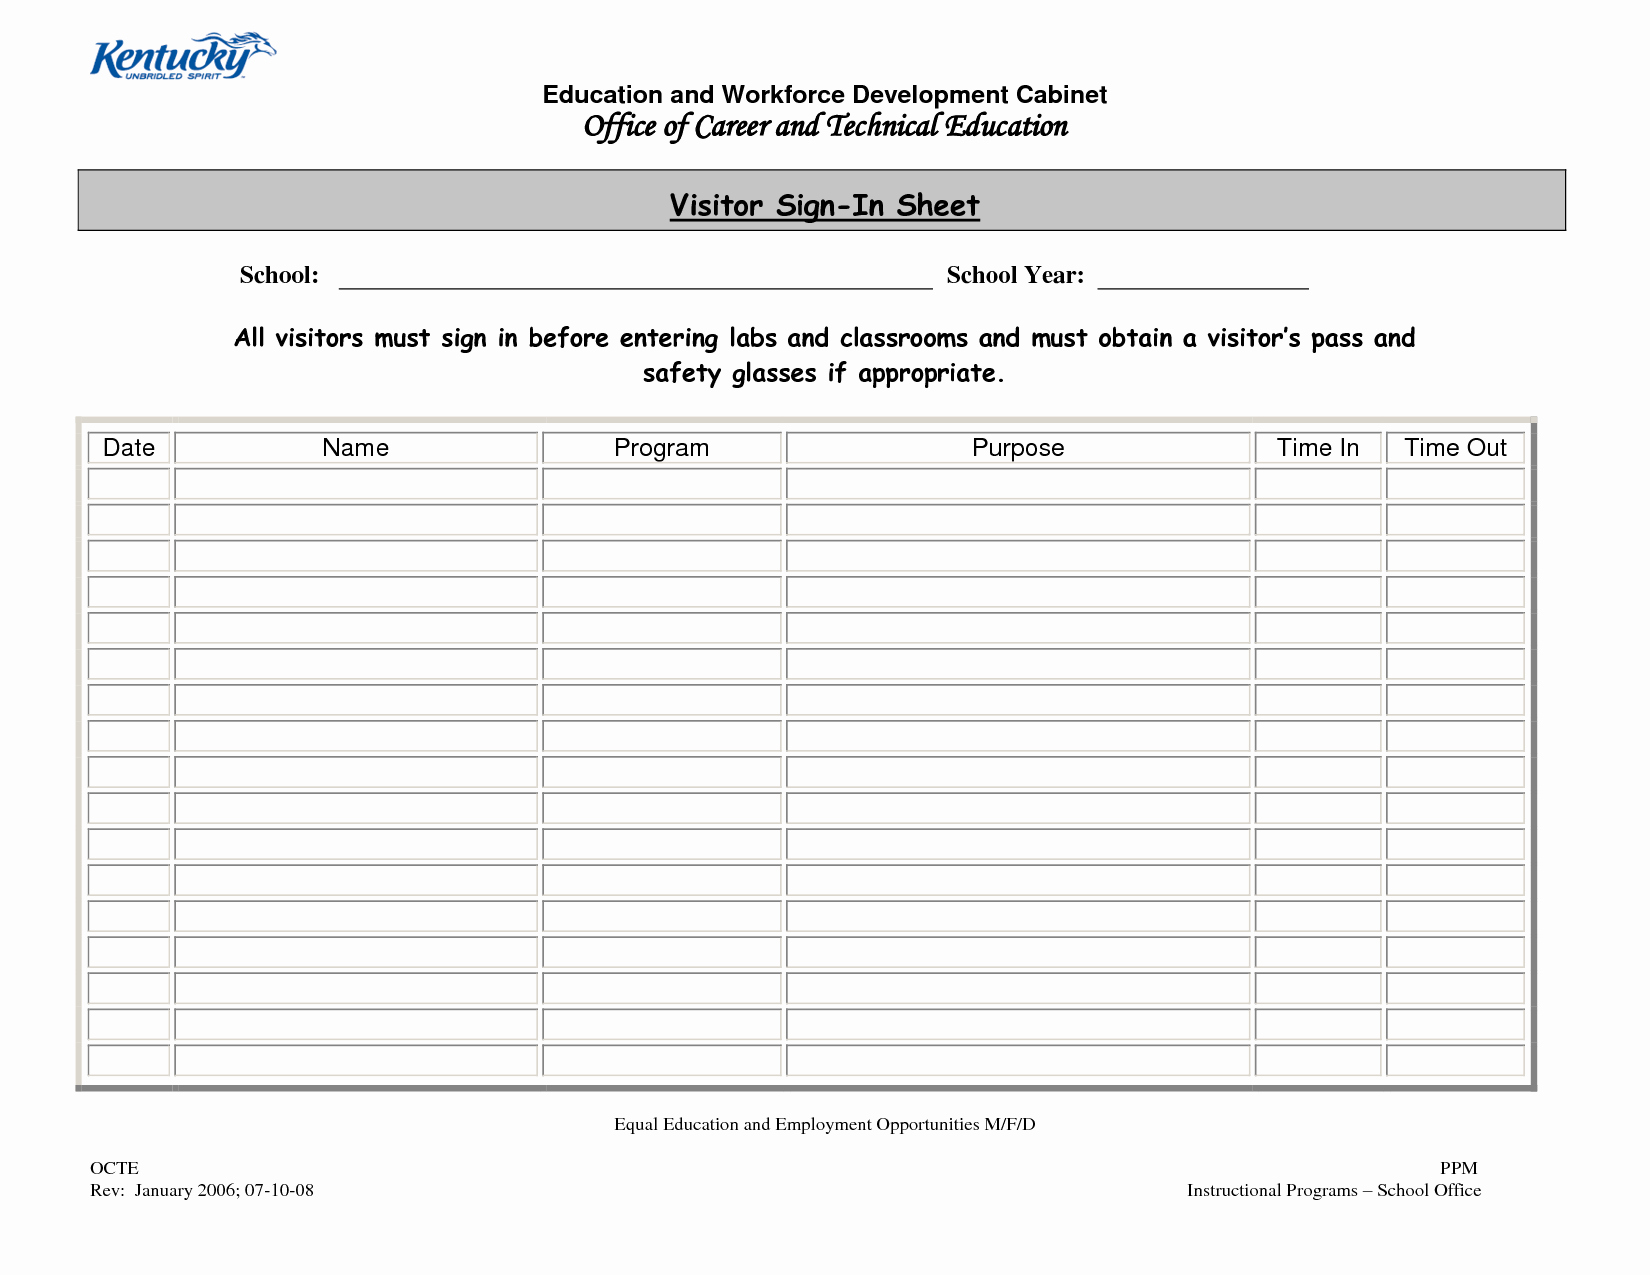 Visitors Signing In Sheet New Best S Of Visitor Sign In Sheet Pdf Visitor Sign In